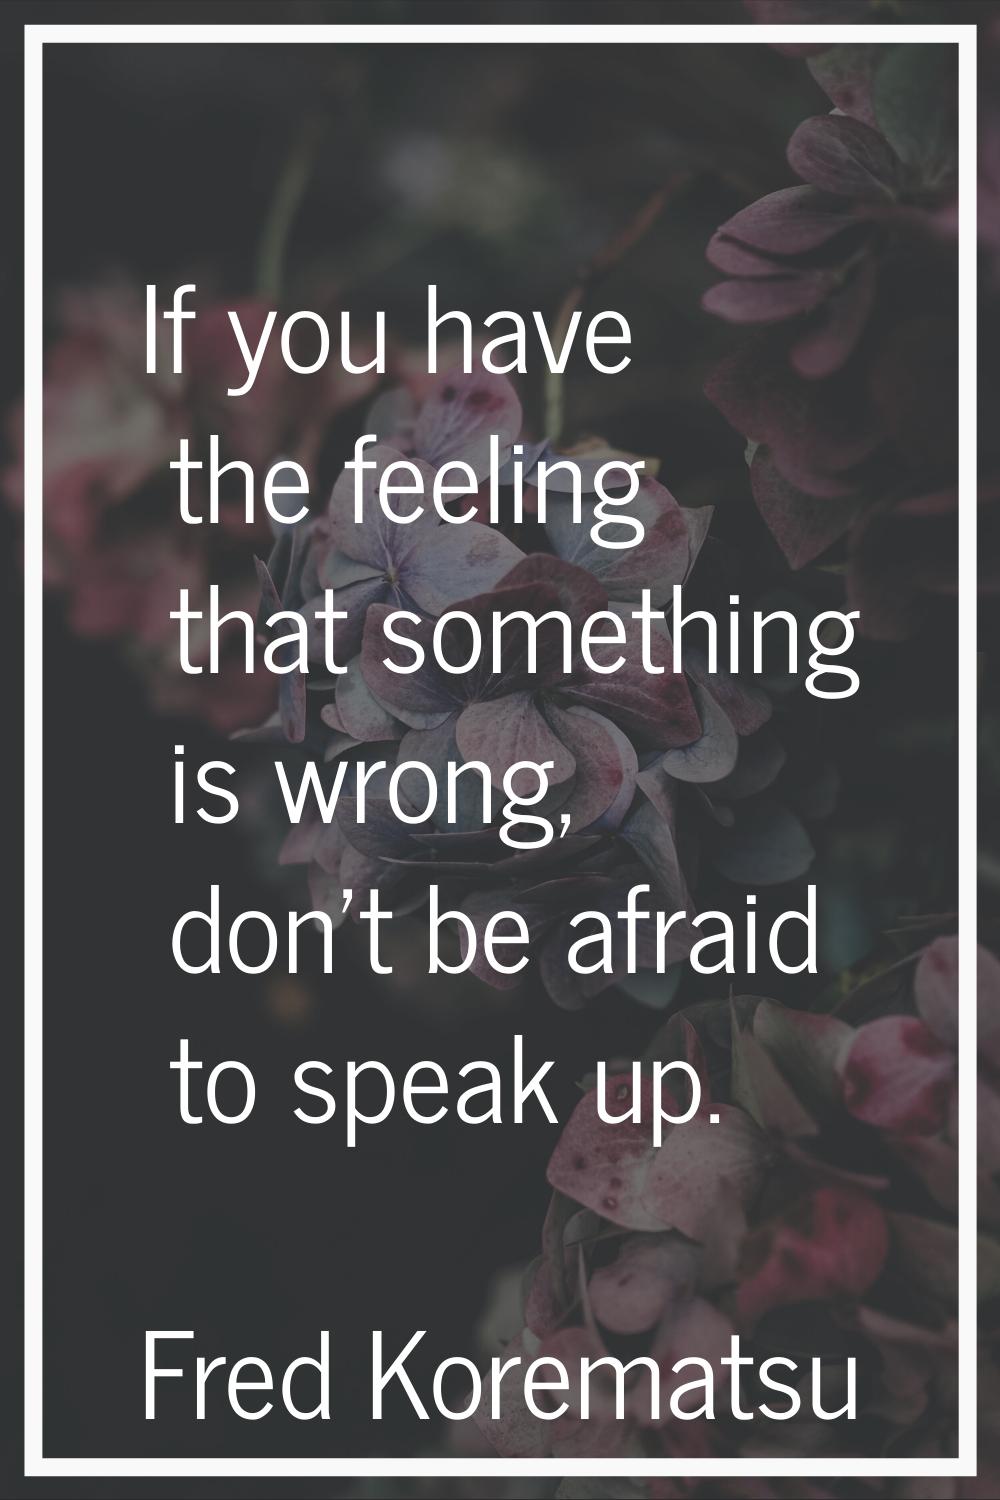 If you have the feeling that something is wrong, don't be afraid to speak up.